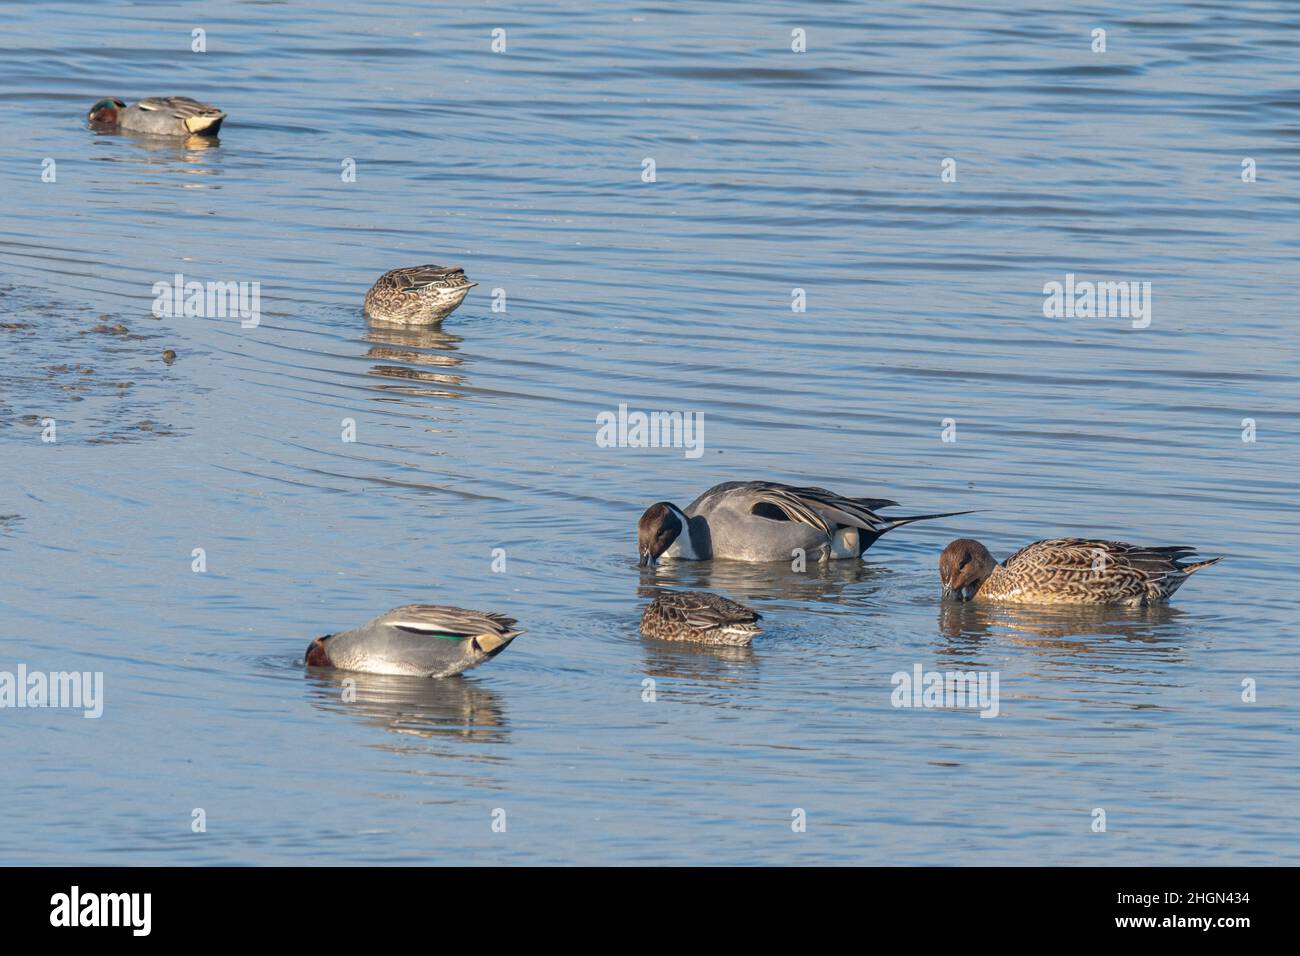 Pintail ducks (Anas acuta) and teal (Anas crecca) feeding in shallow water at Farlington Marshes Nature Reserve during winter, Hampshire, UK Stock Photo